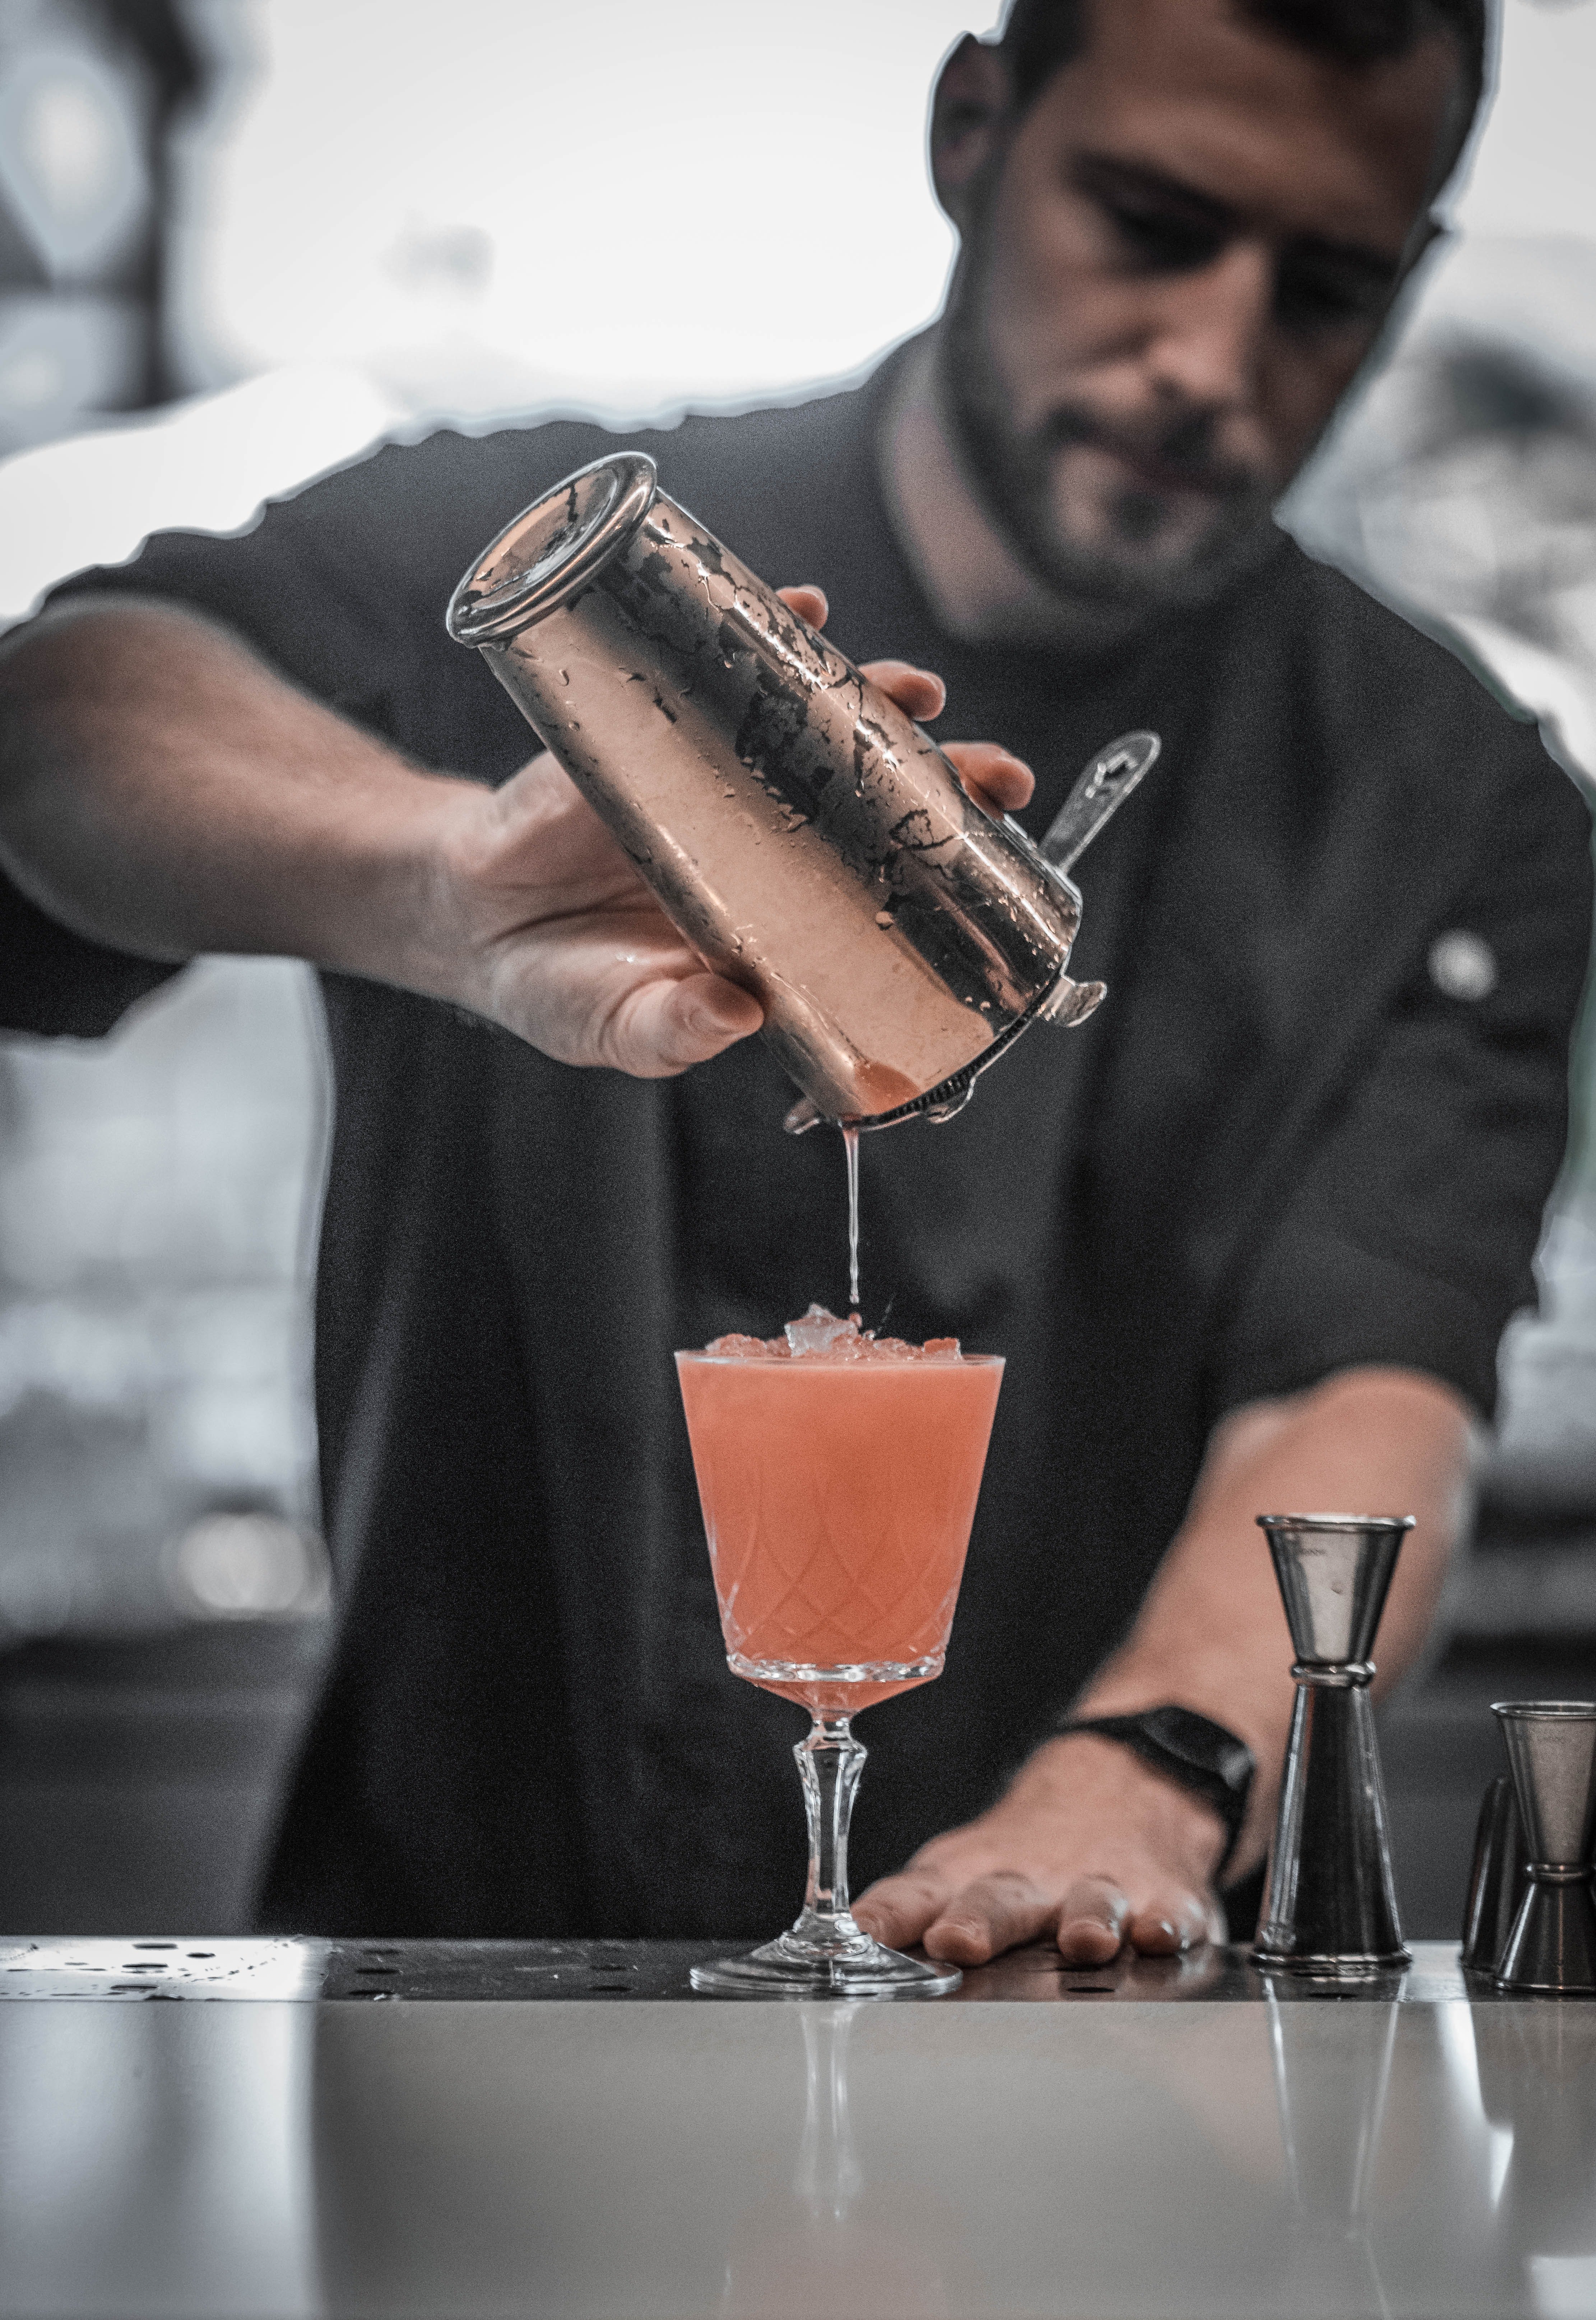 Bartender pouring drinks from behind the bar. | Photo: Pexels/ Daniel Torobekov